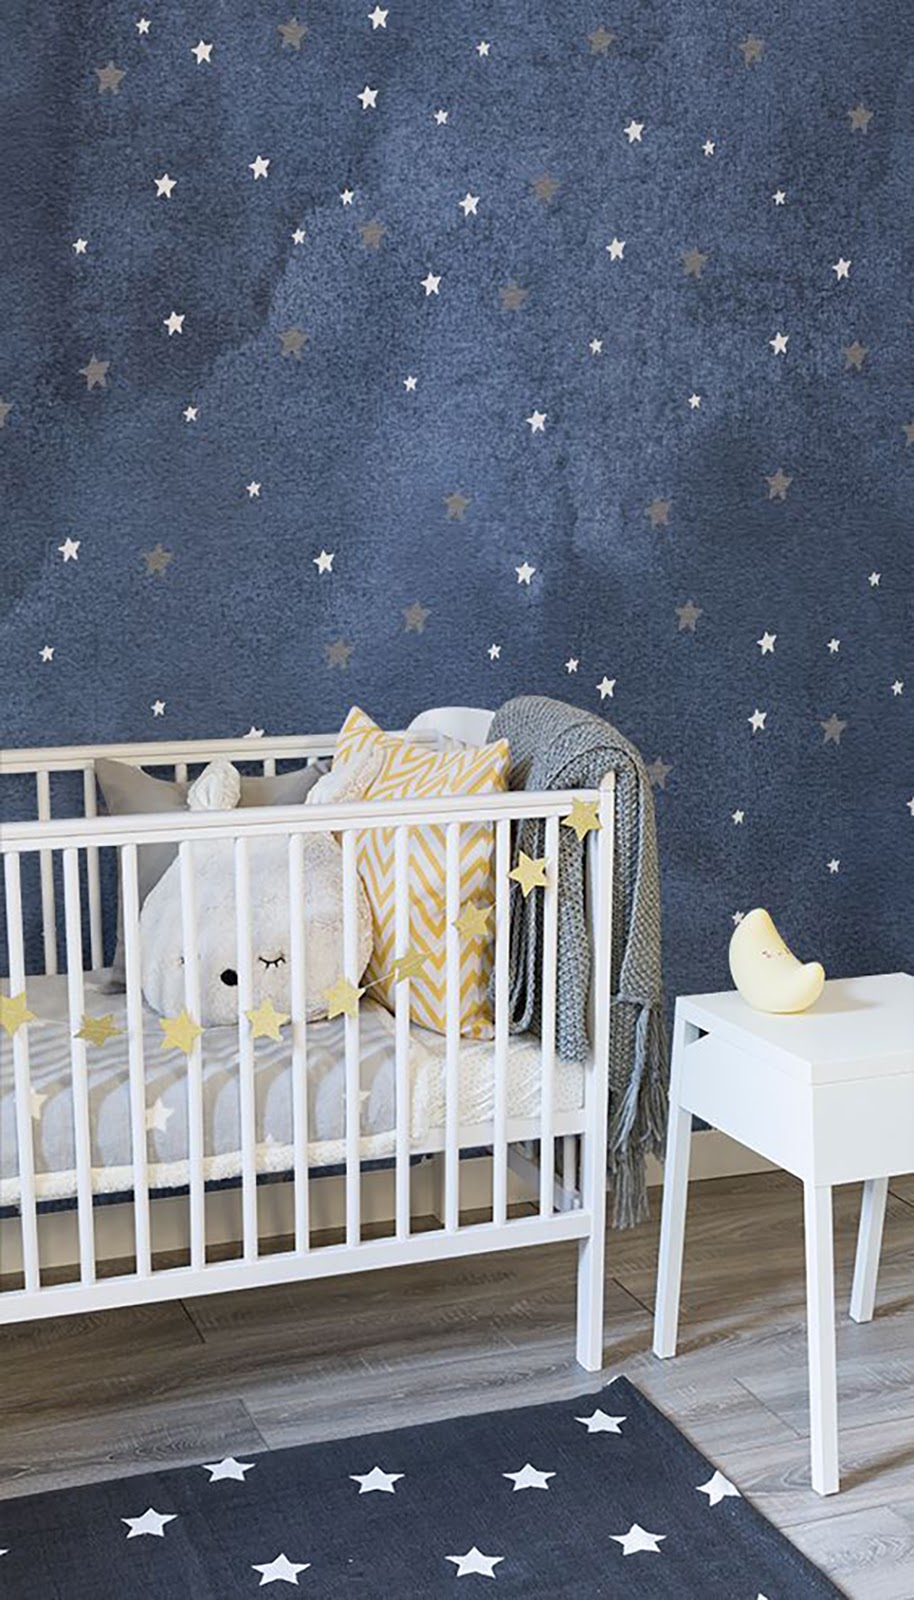 How To Decorate A Gender Neutral Baby Nursery - Night Sky Baby Room - HD Wallpaper 